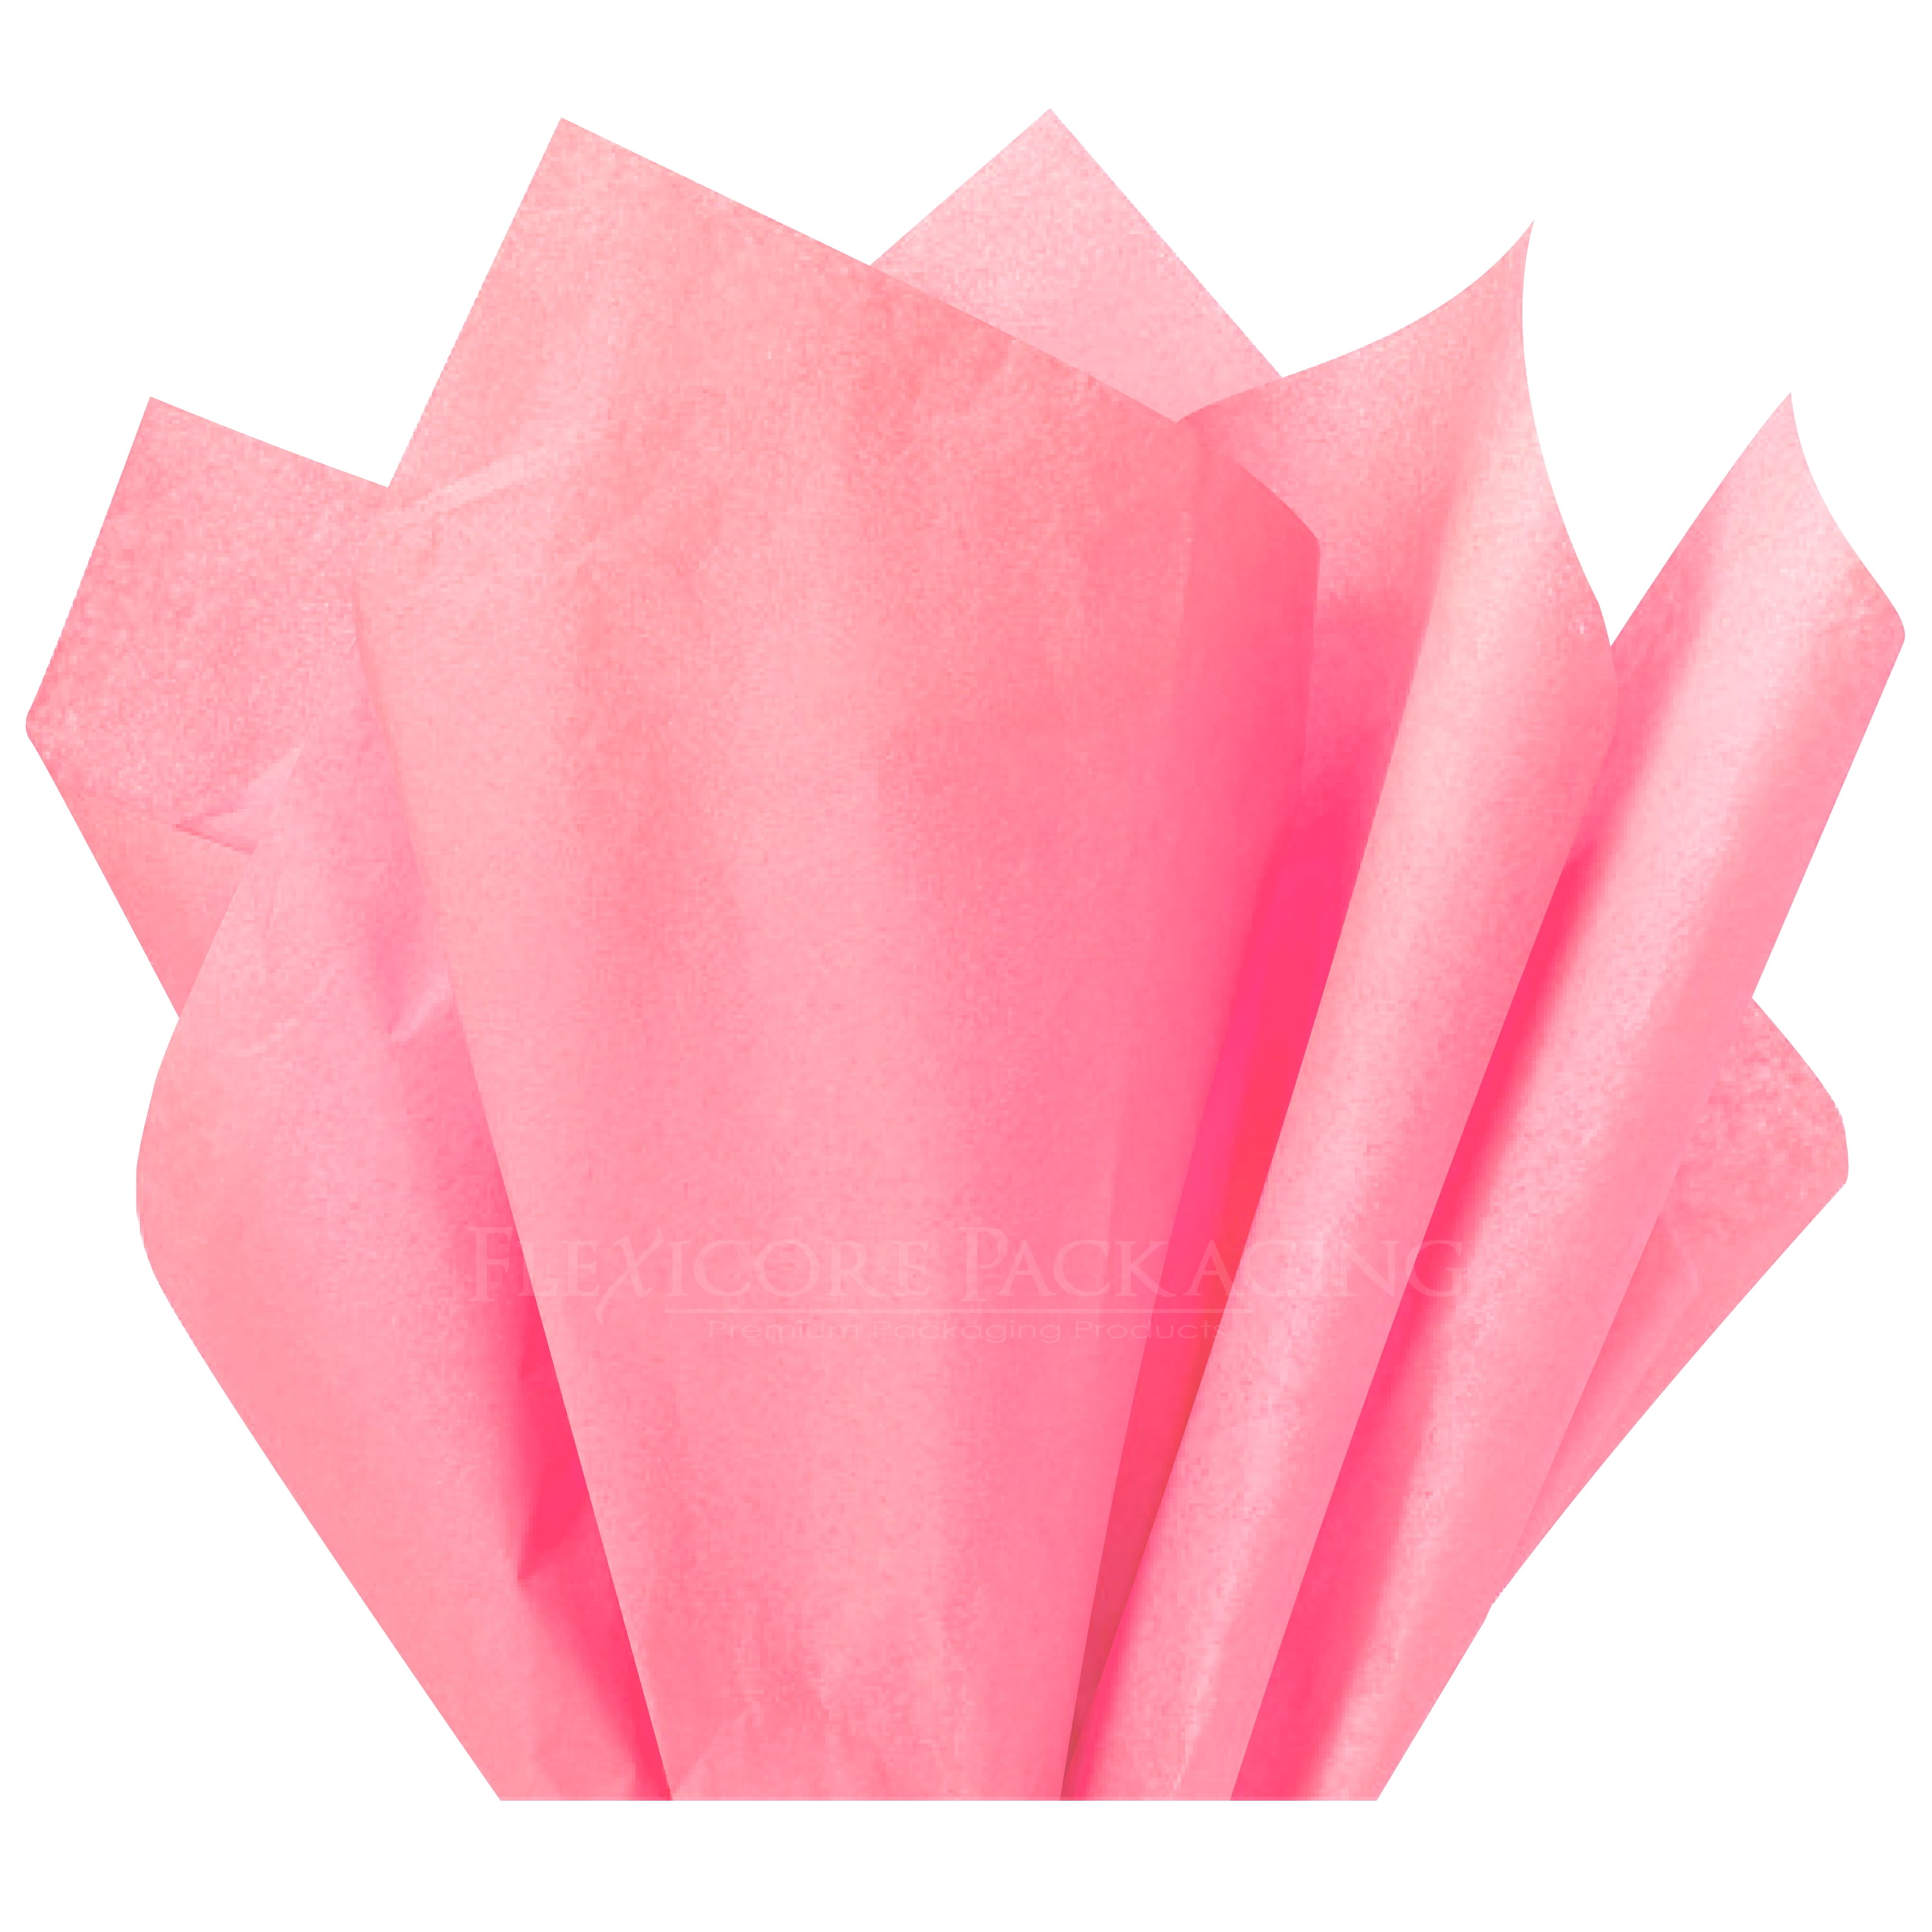 100 Sheets of White Acid Tissue Paper 400mm X 700mm for sale online